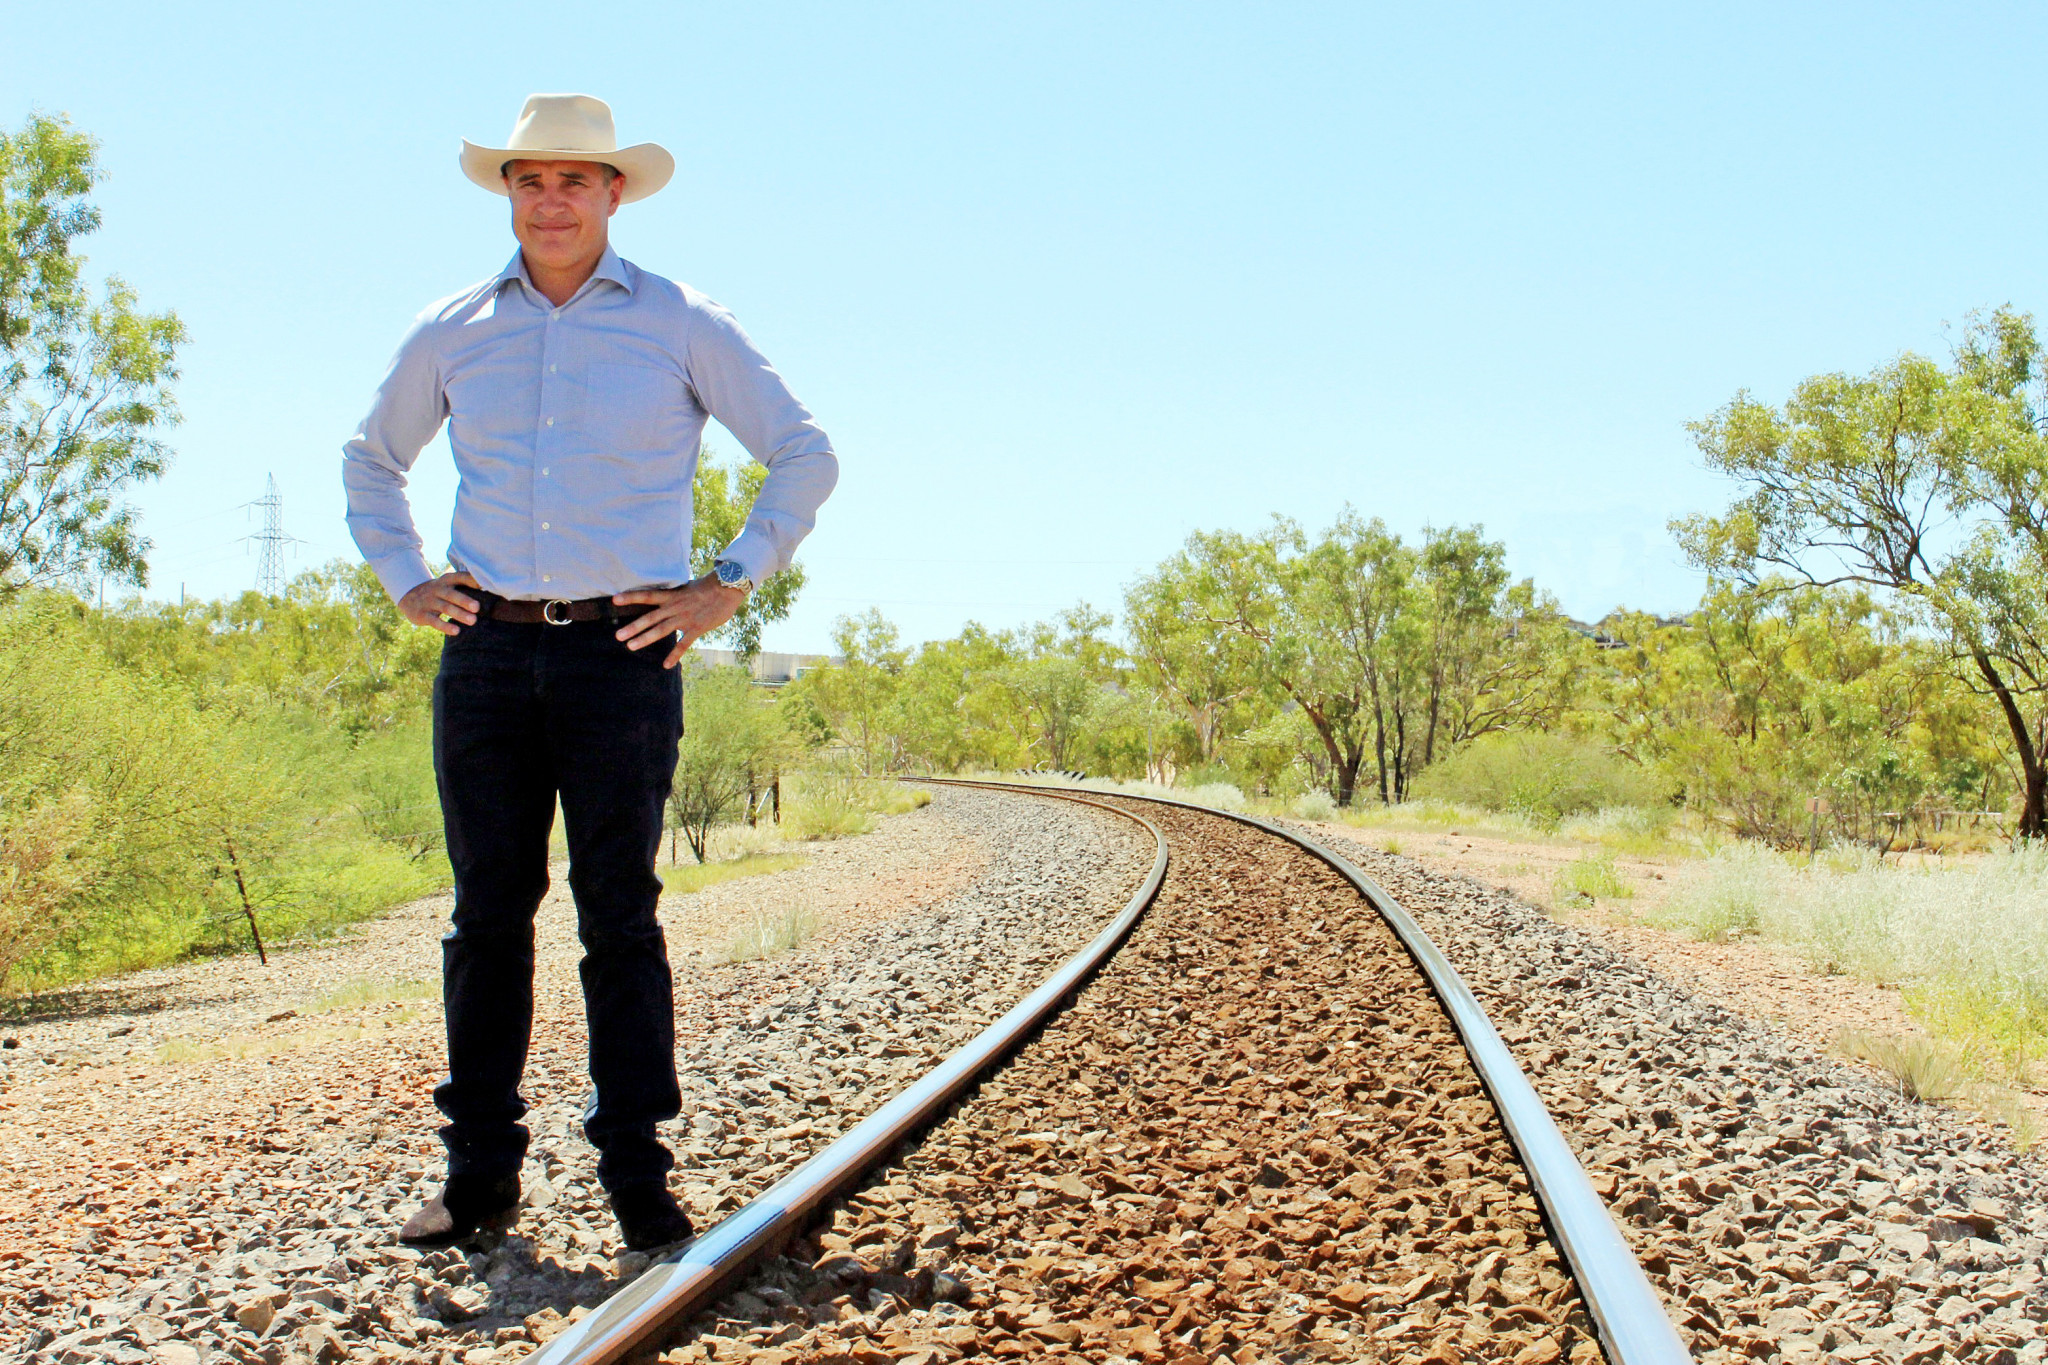 Robbie Katter says the Queensland government could make immediate changes to increase rail use on the Mount Isa line, rather than waste money on a study.